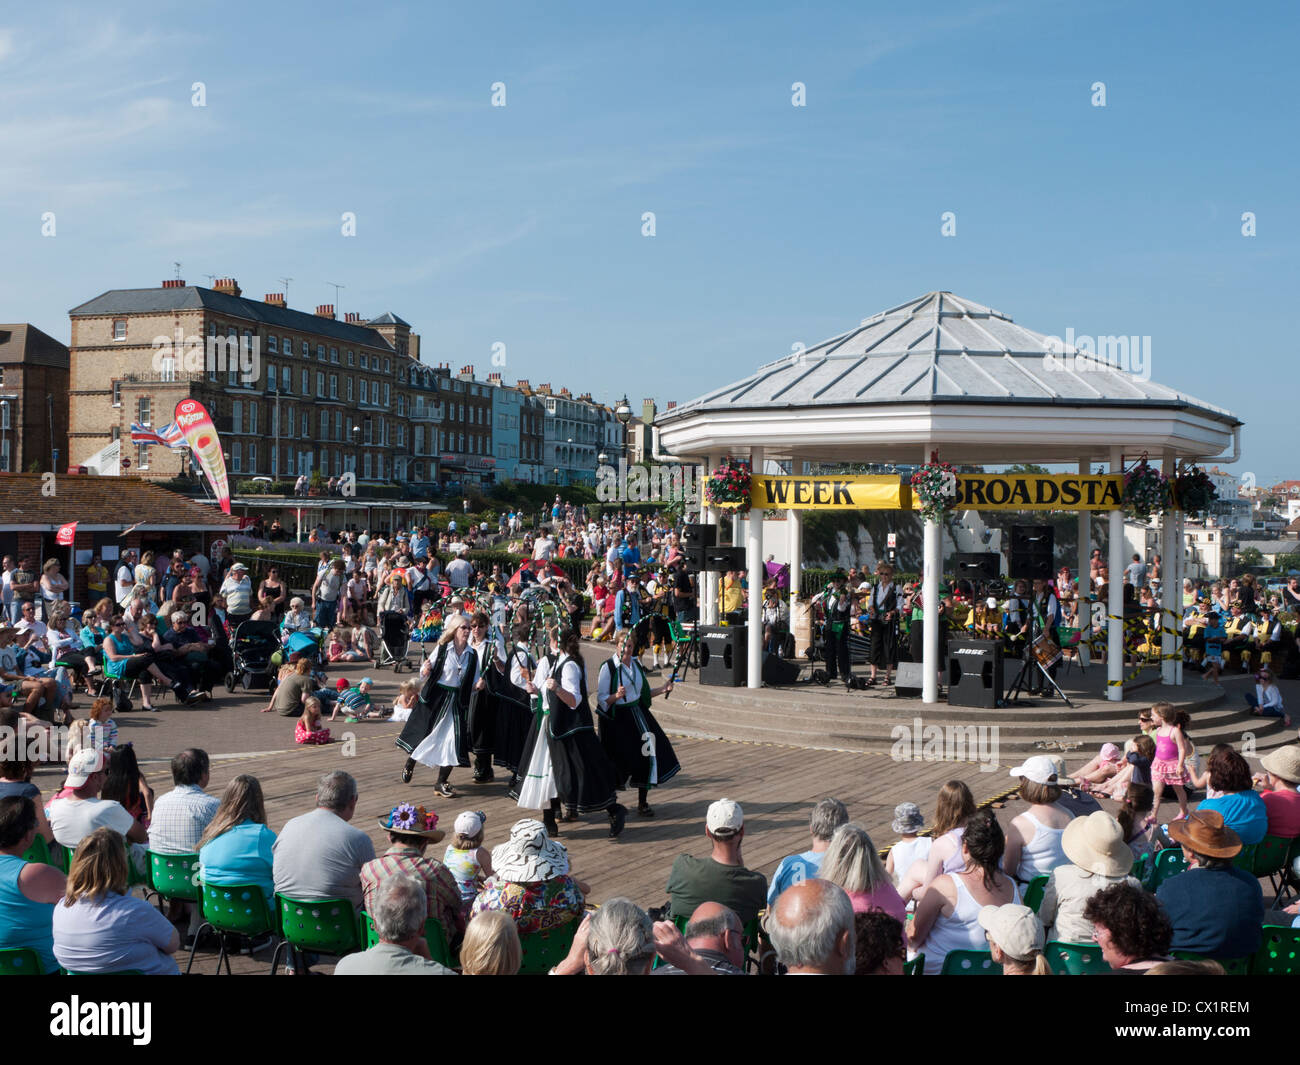 Crowds of people watching the dancing at the 2012 Broadstairs Folk Week music festival in Kent, England Stock Photo